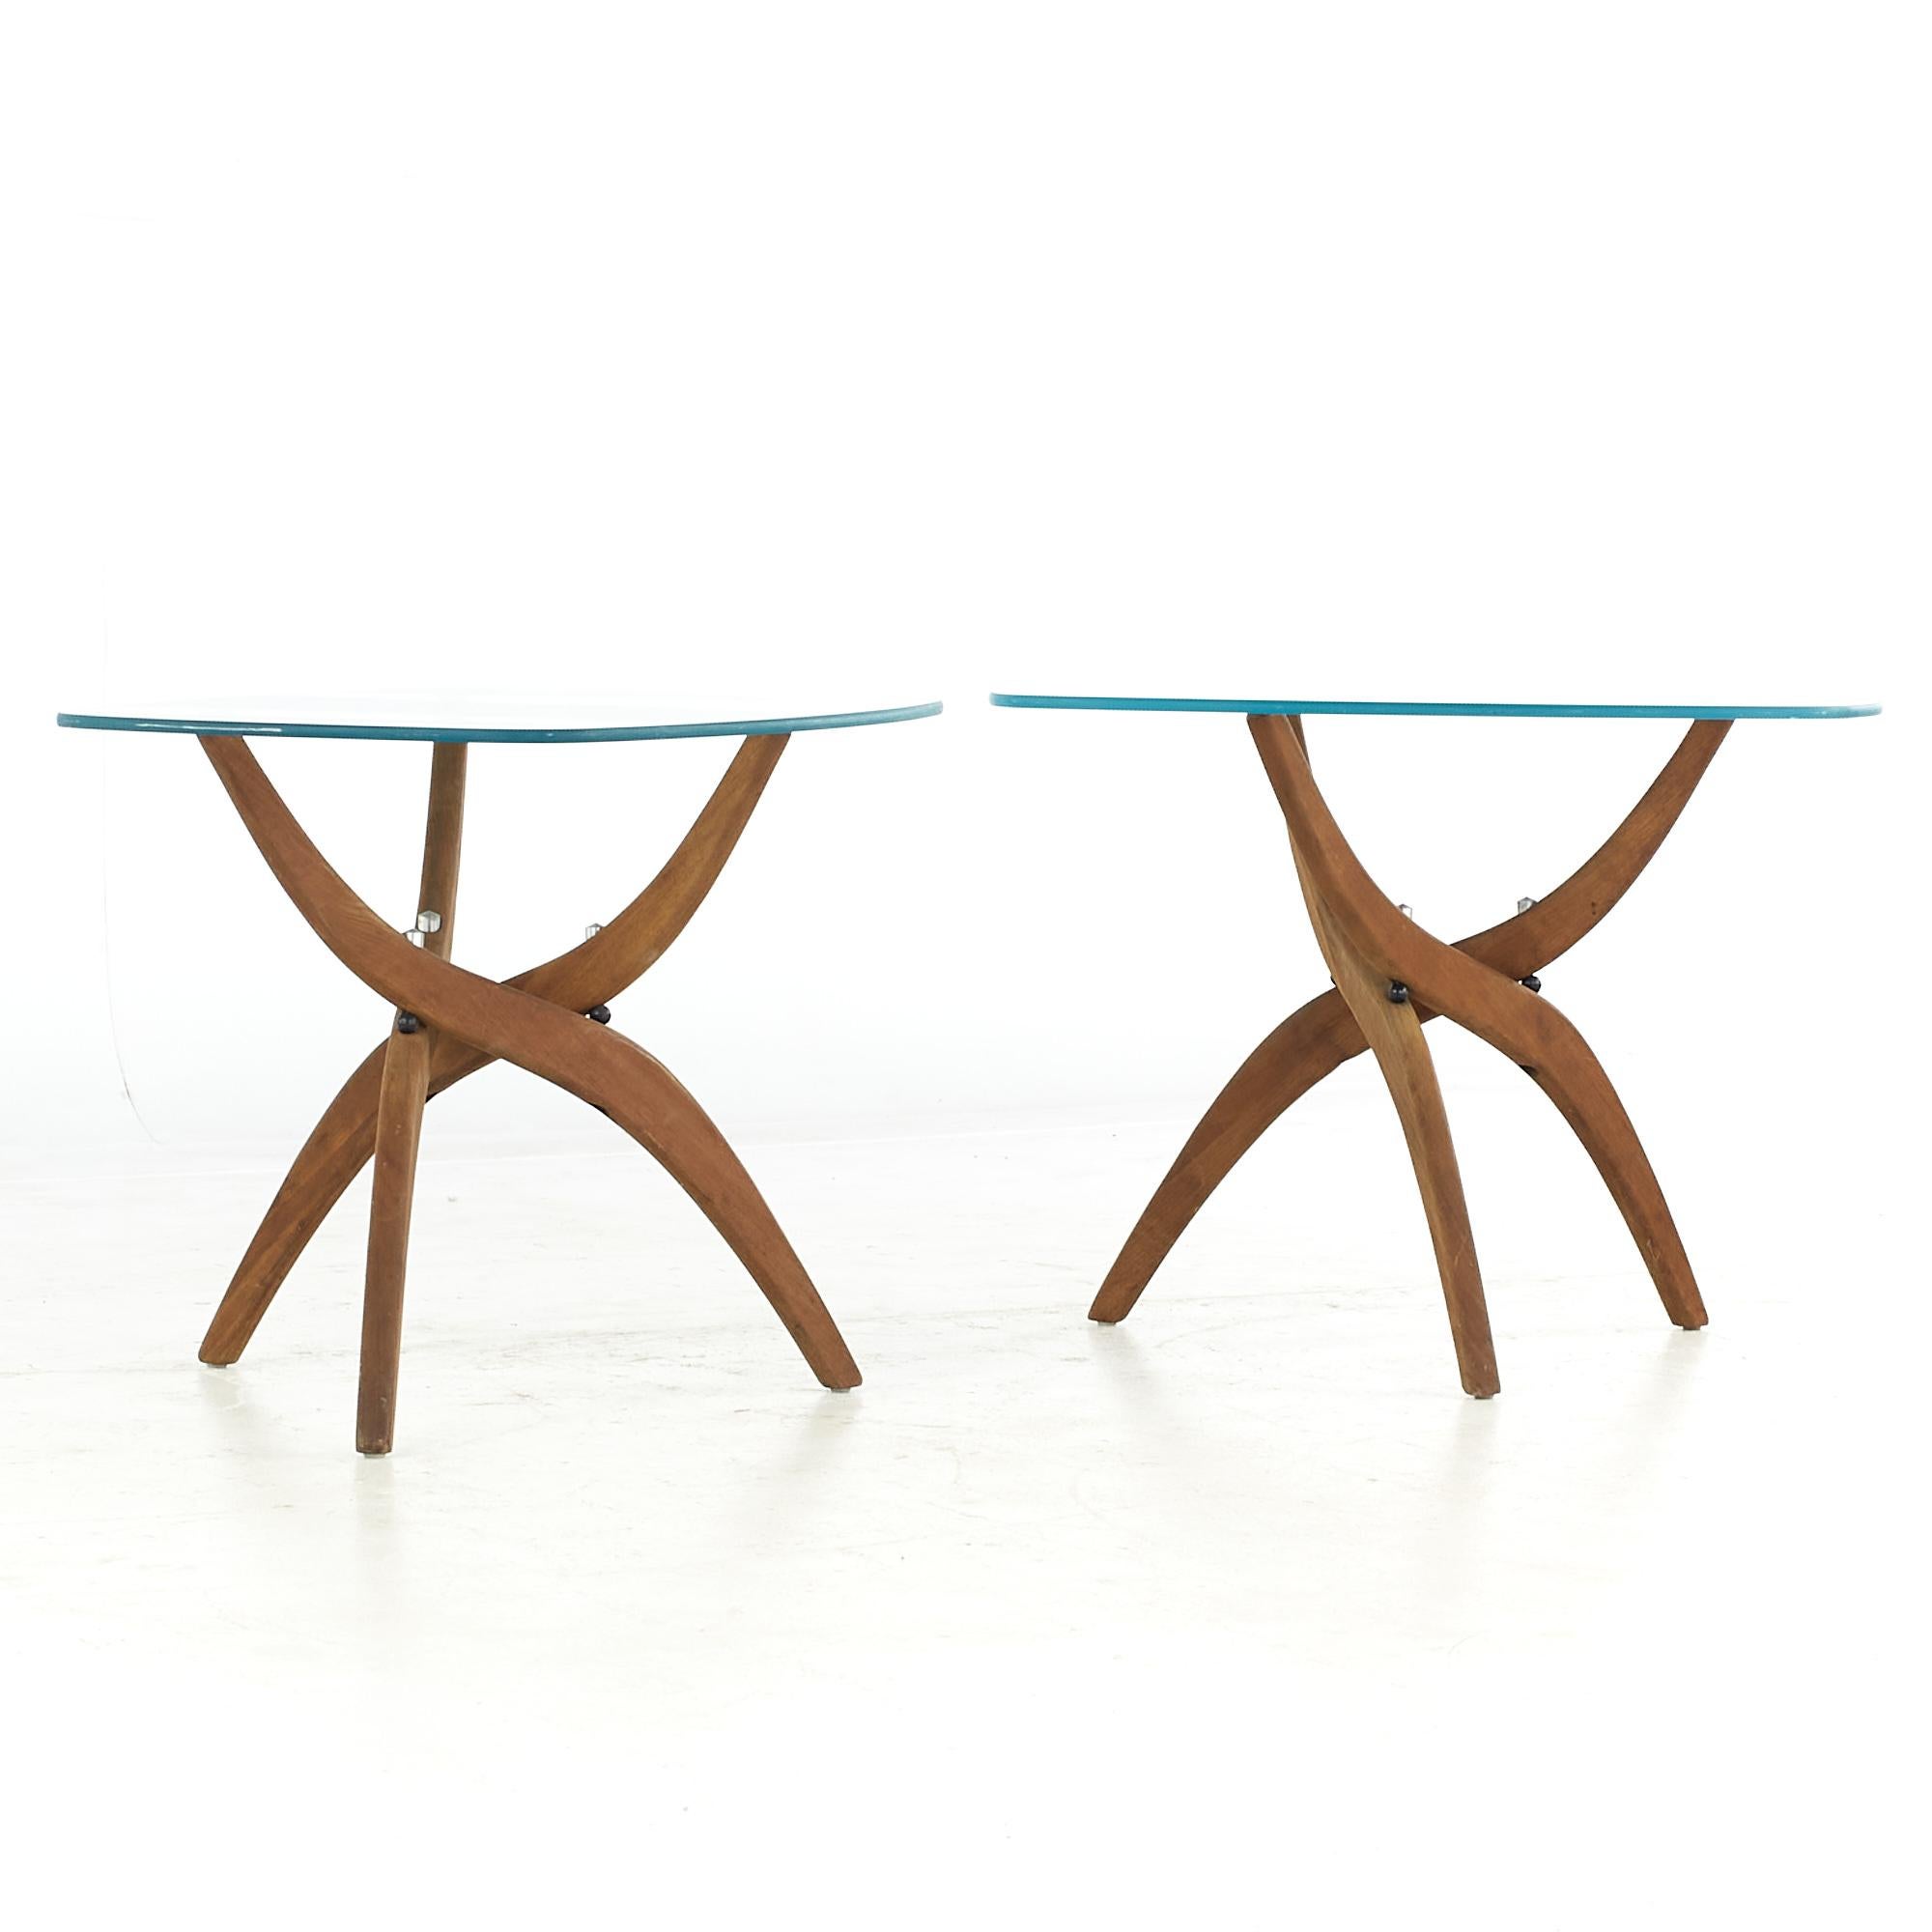 Forest Wilson Mid Century Walnut Side Tables - Pair

Each table measures: 27 wide x 19.75 deep x 20.25 inches high

All pieces of furniture can be had in what we call restored vintage condition. That means the piece is restored upon purchase so it’s